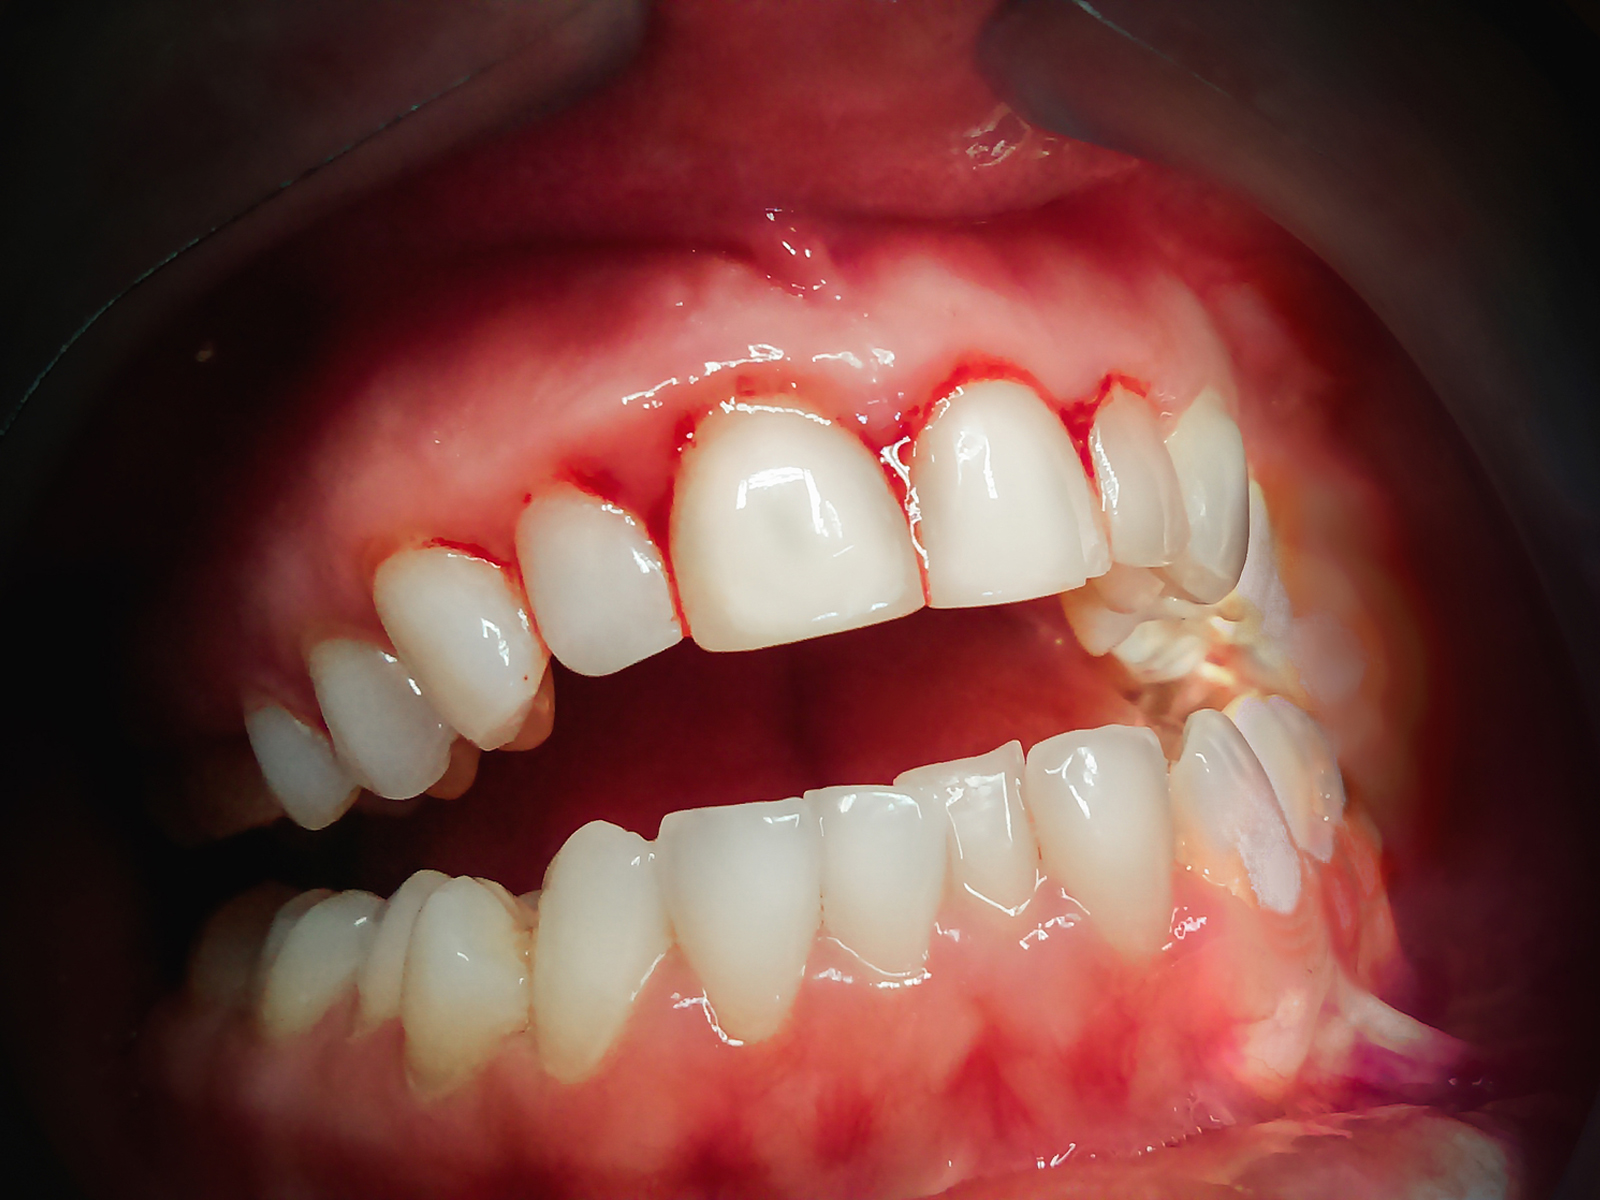 What caused Bleeding Gums?